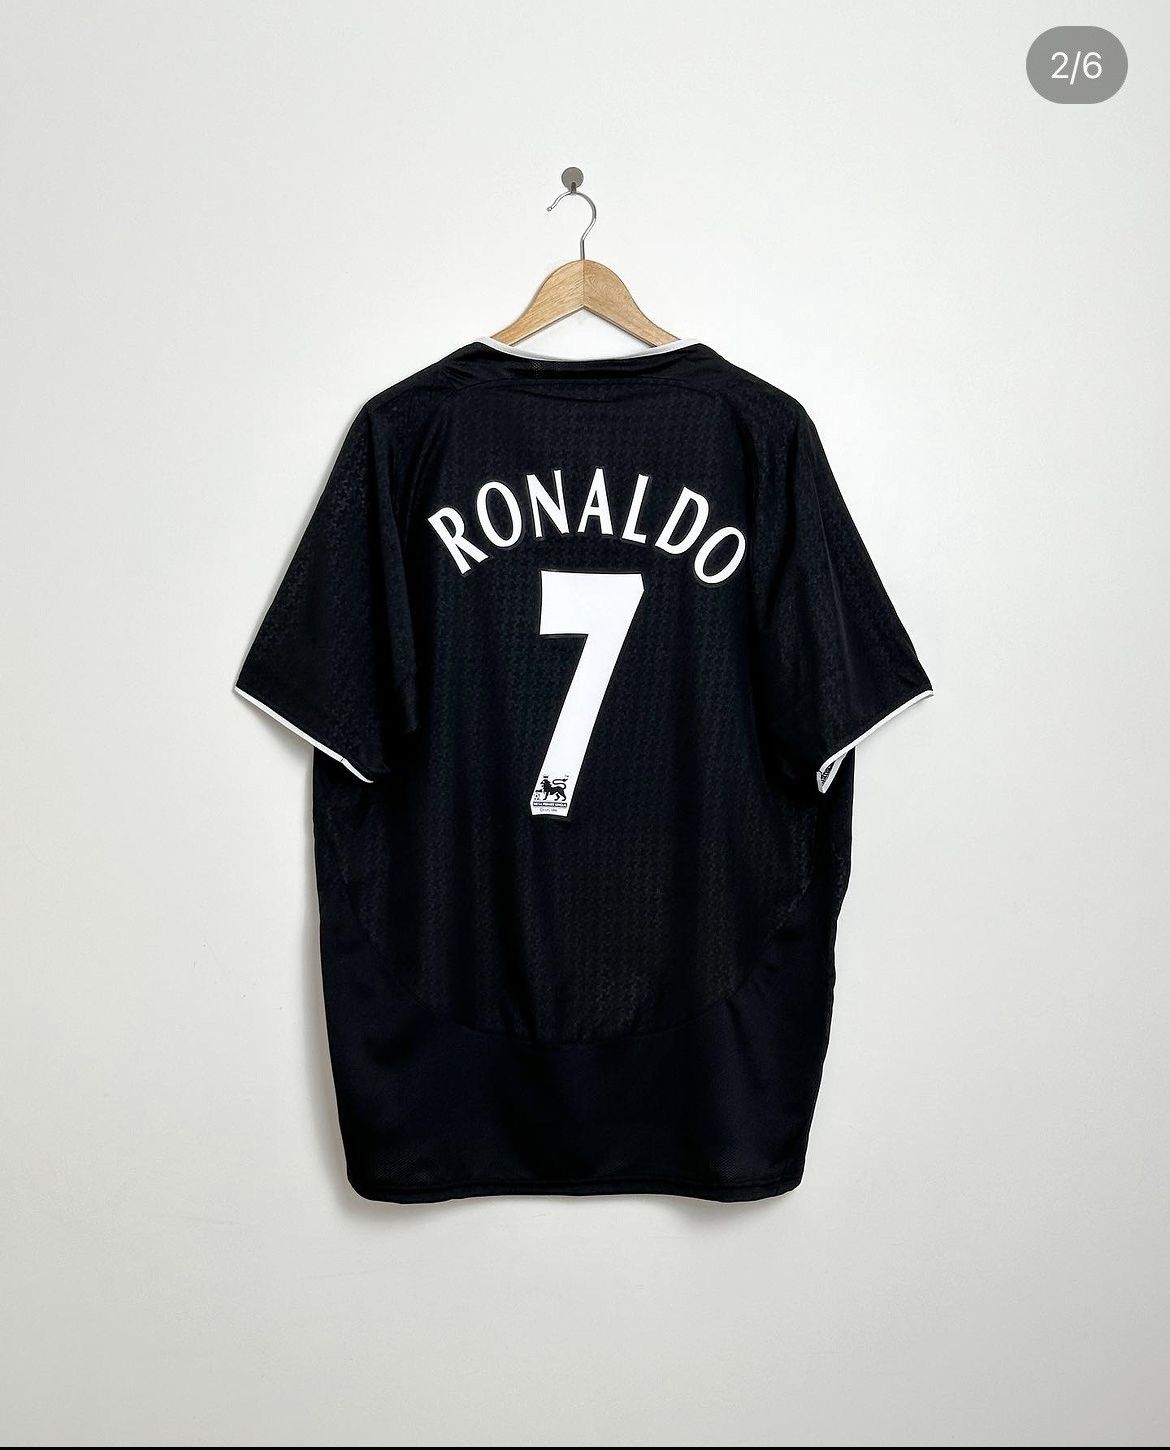 Pre-owned Manchester United X Nike 7 Ronaldo Manchester United 2003/04 Nike Soccer Jersey In Black